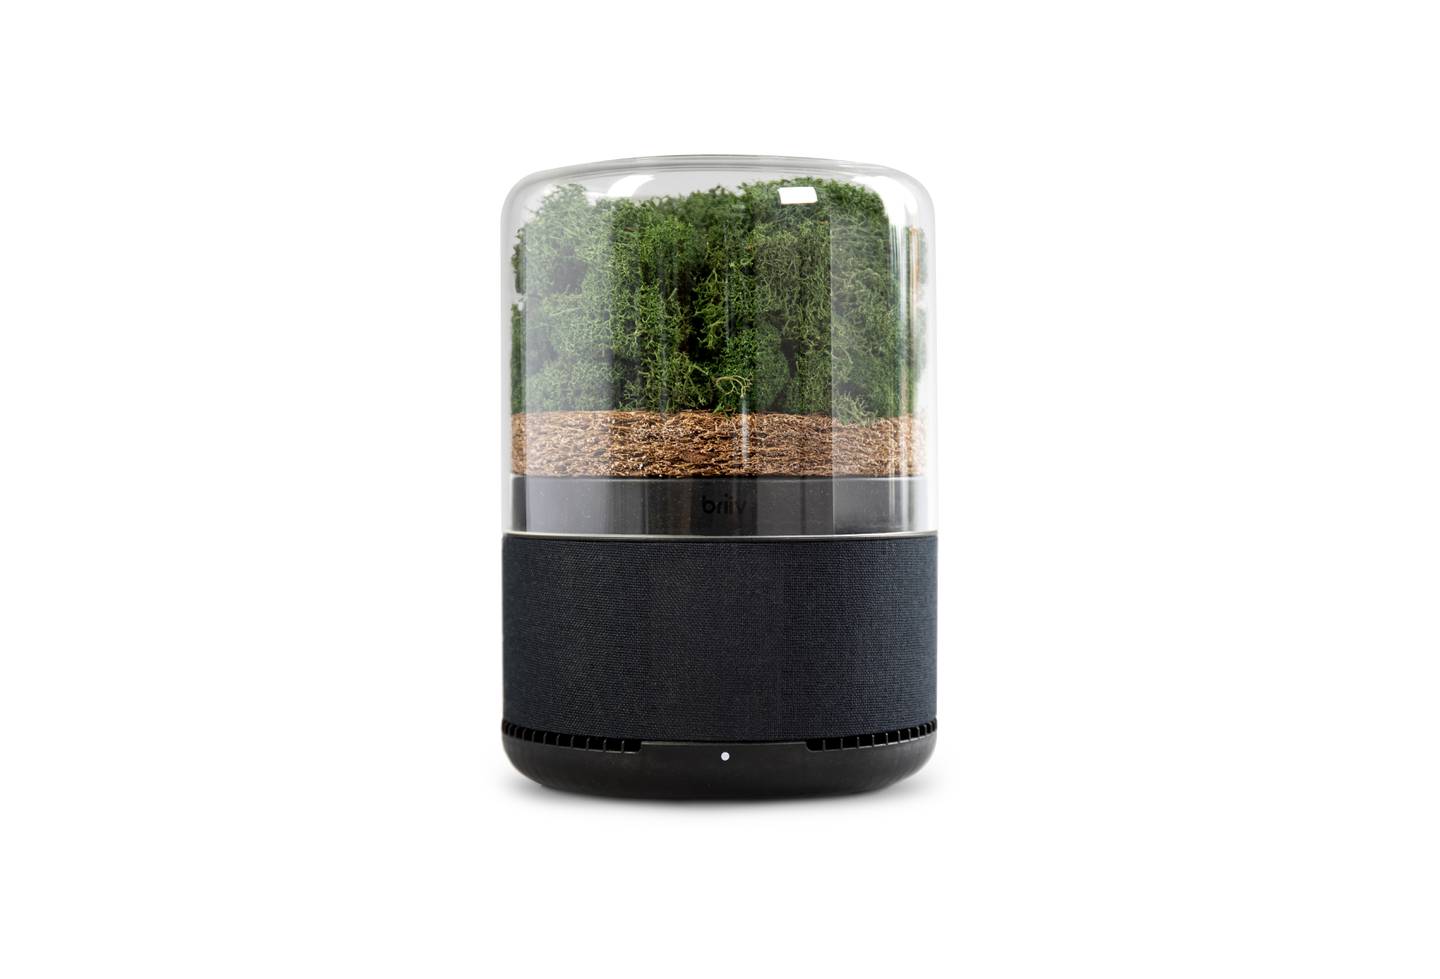 Briiv consists of three fully biodegradable filters that utilise the natural micro-structures of moss, coconut, carbon and silk to filter air. Photo: Briiv